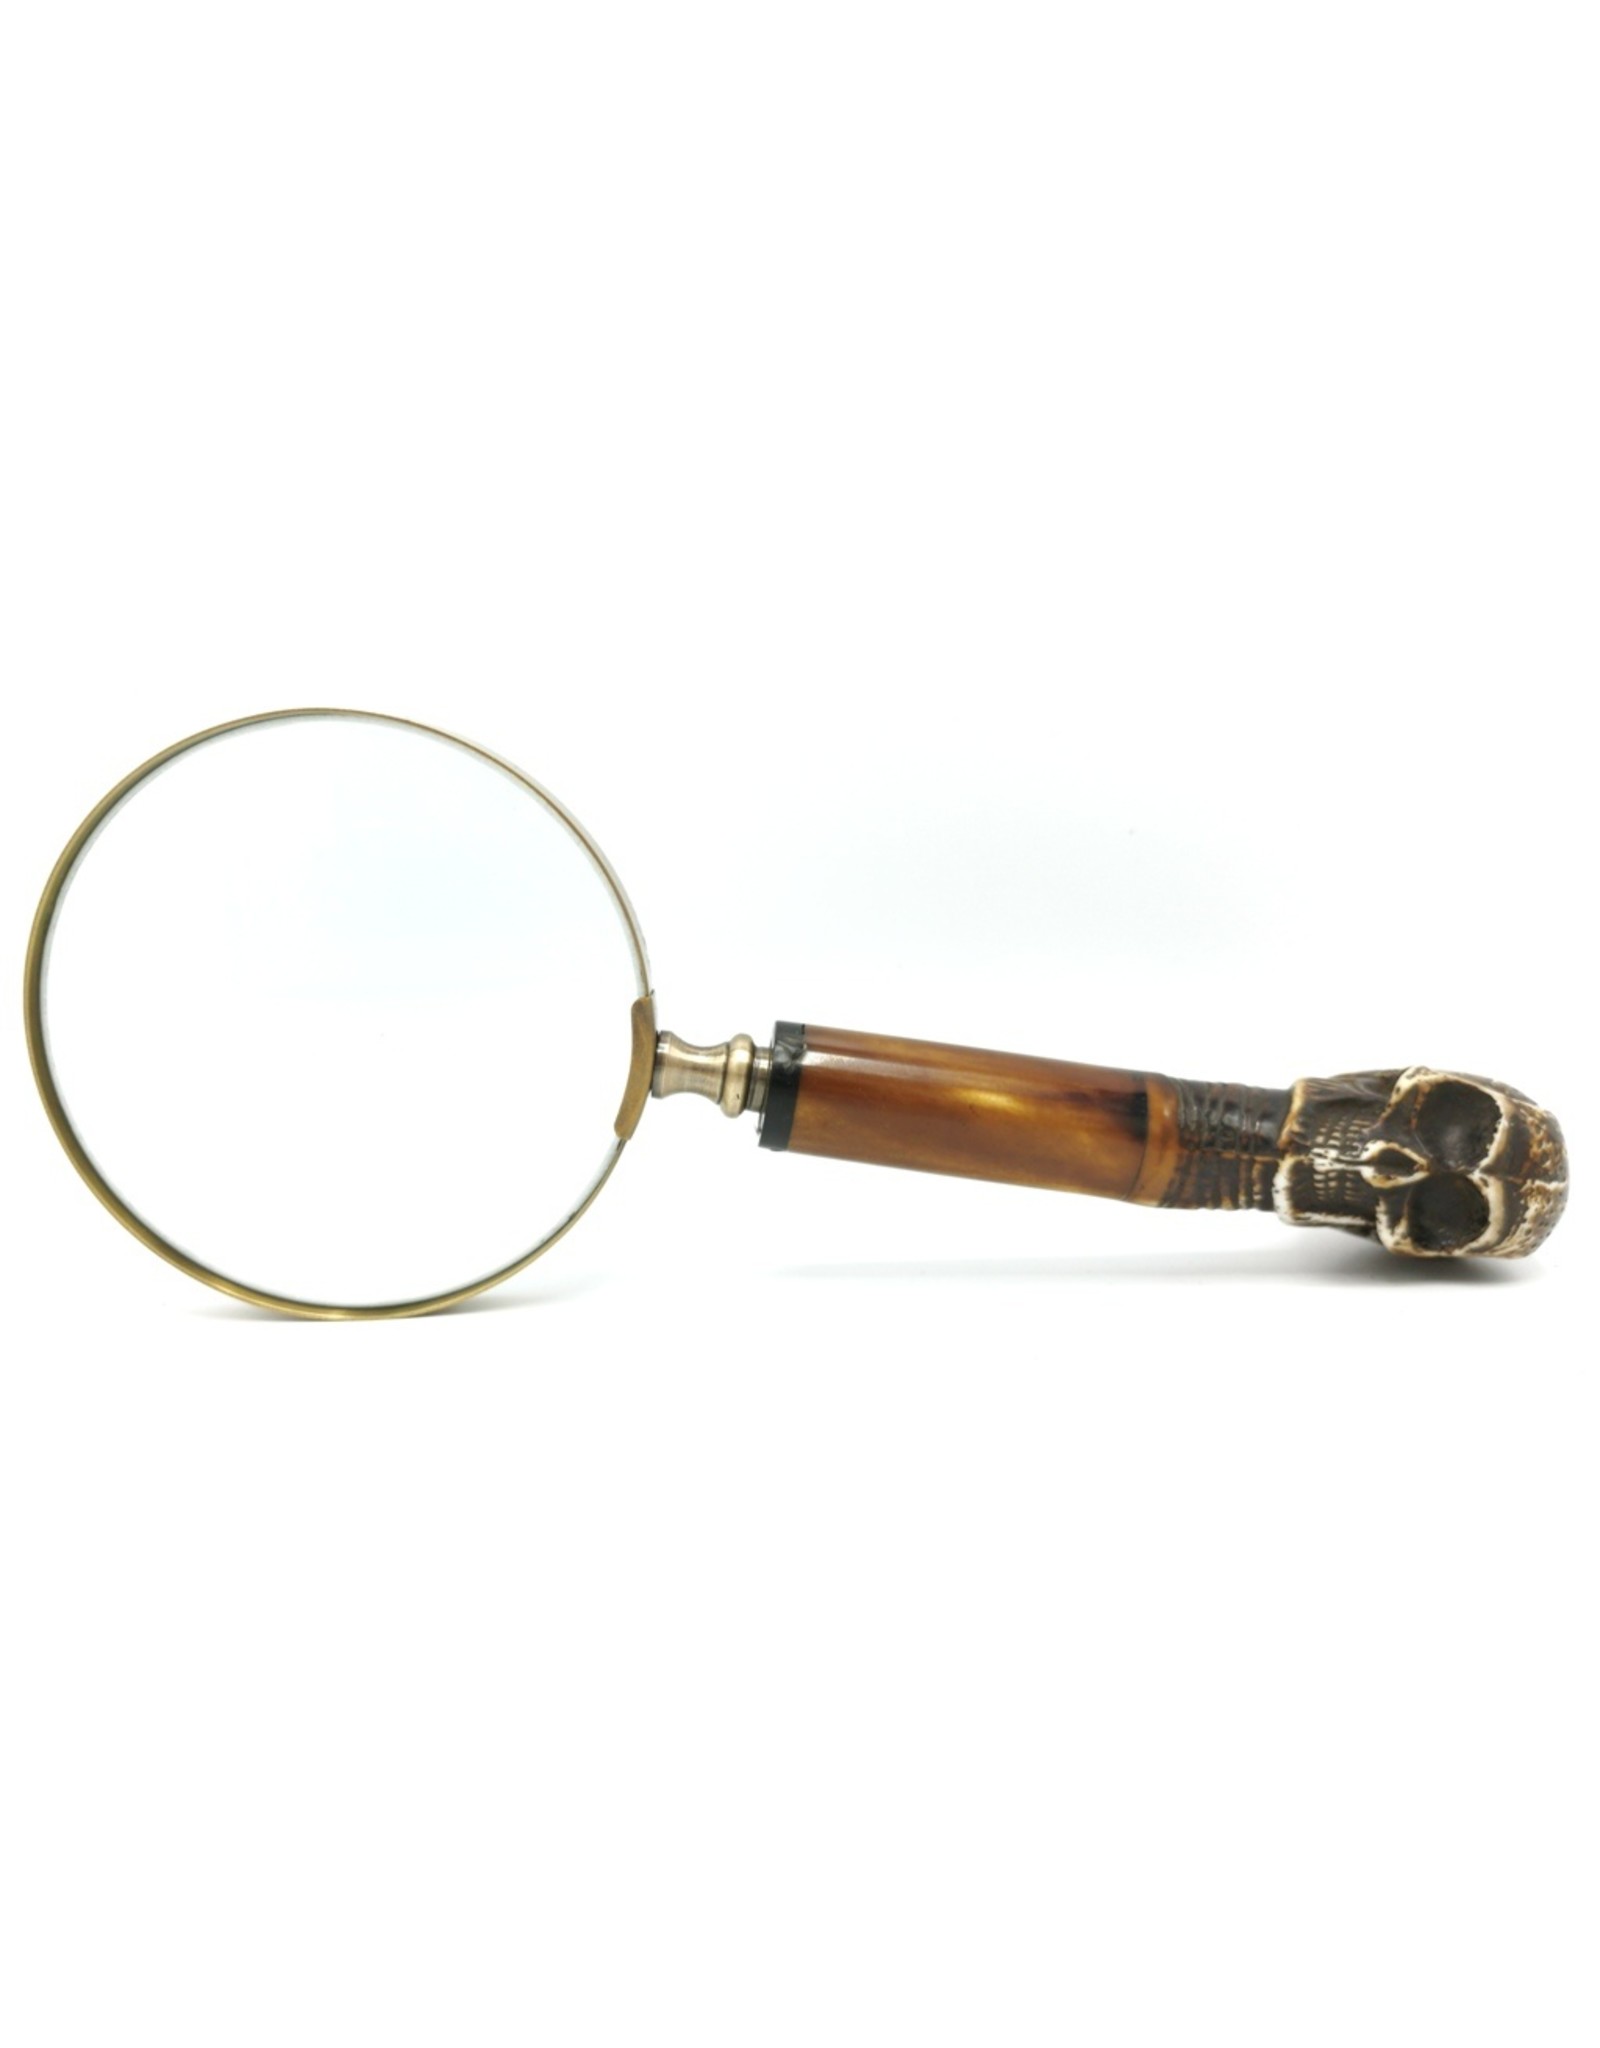 Trukado Gothic and Steampunk accessories - Gothic Magnifying Glass with Skull Handle